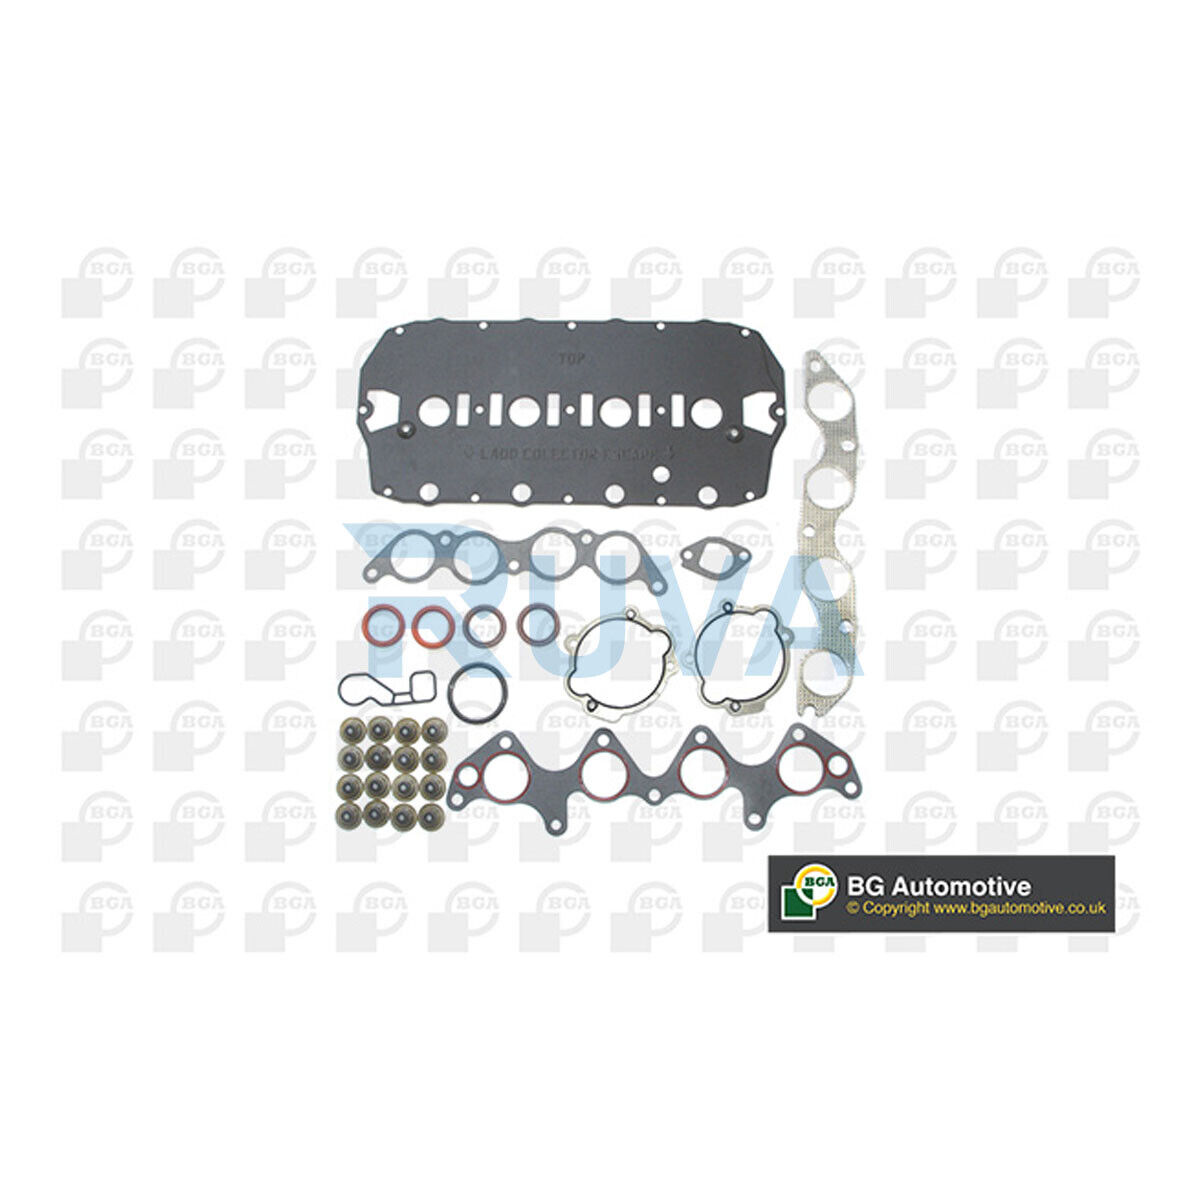 Fits MG MGF ZR TF Rover Coupe 200 400 1.8 Ruva Cylinder Head Gasket Set